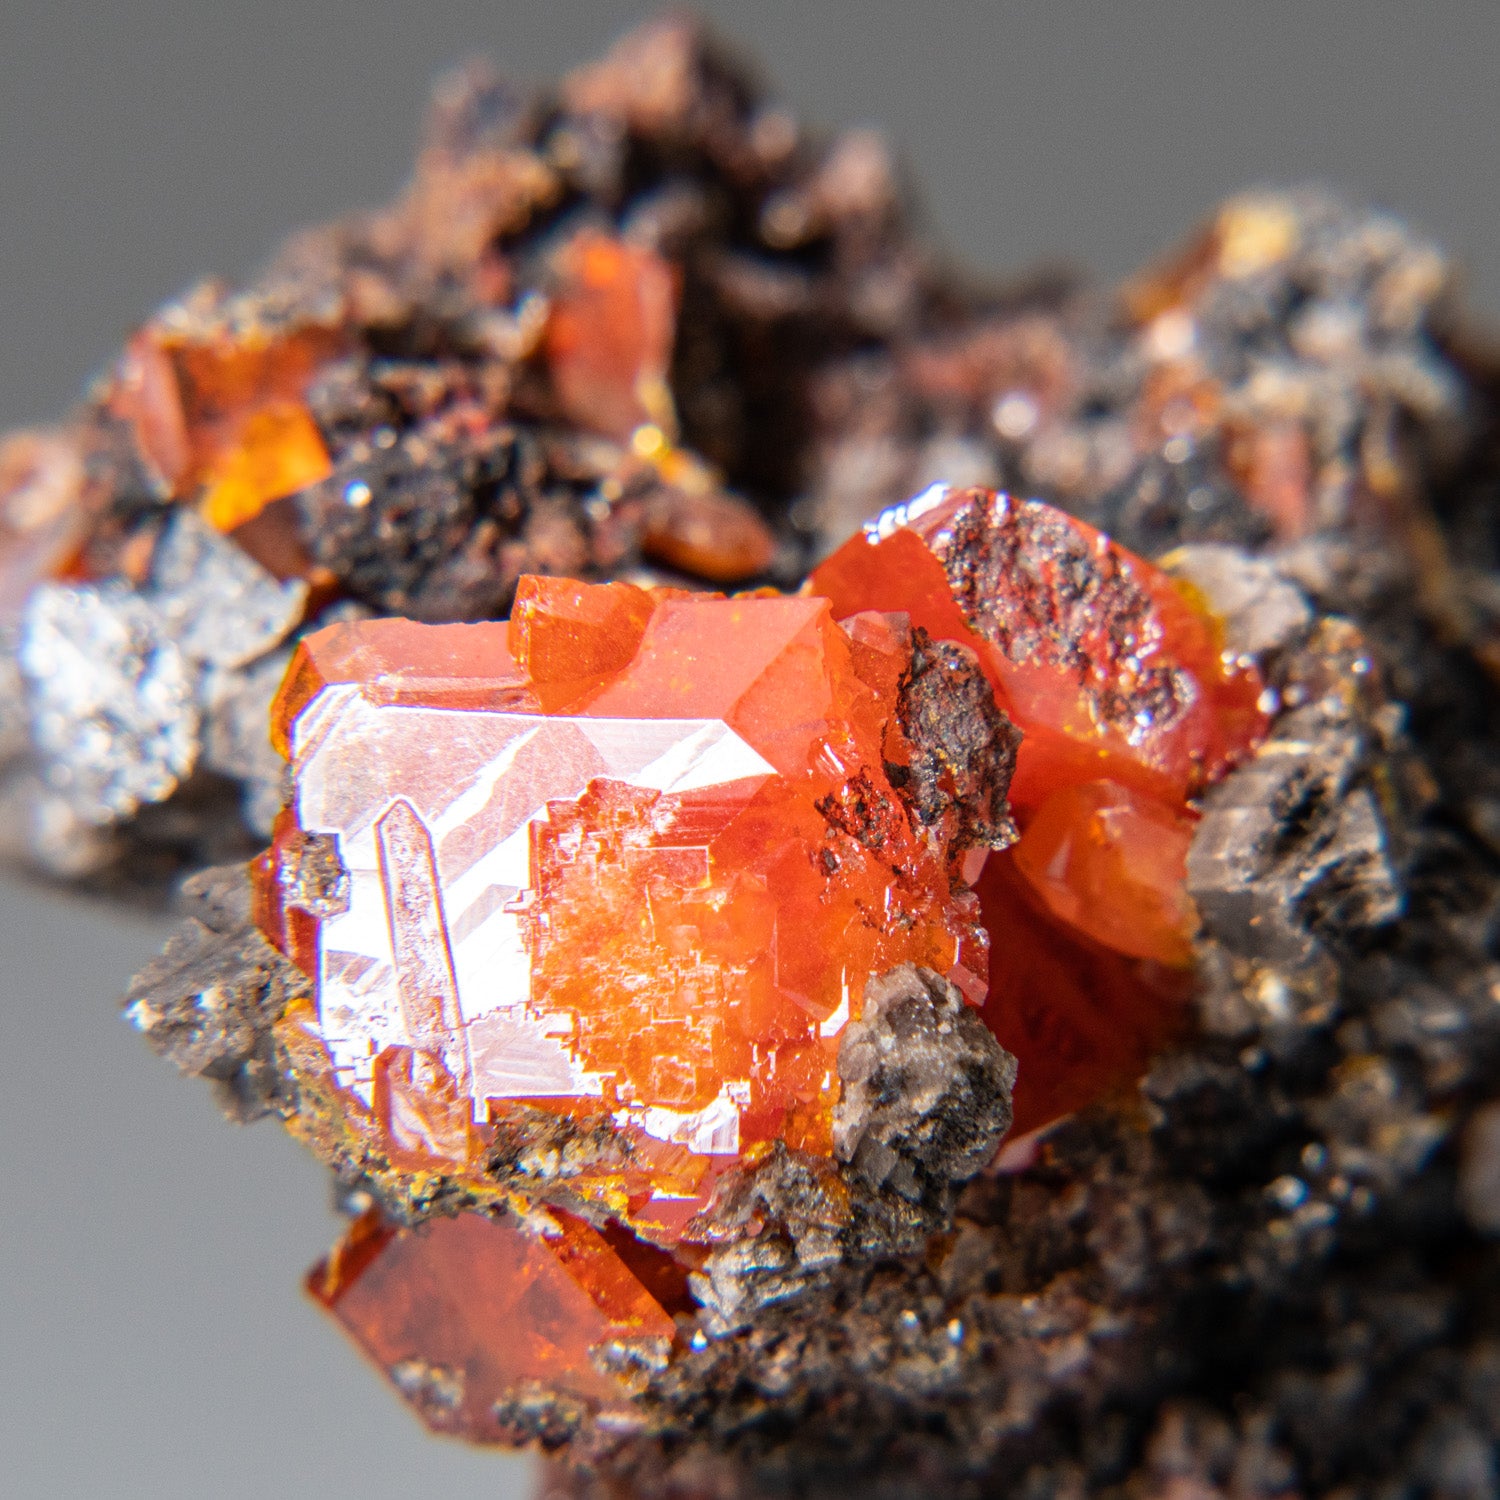 Wulfenite from Maoniuping Mine, Liangshan Autonomous Prefecture, Sichuan Province, China